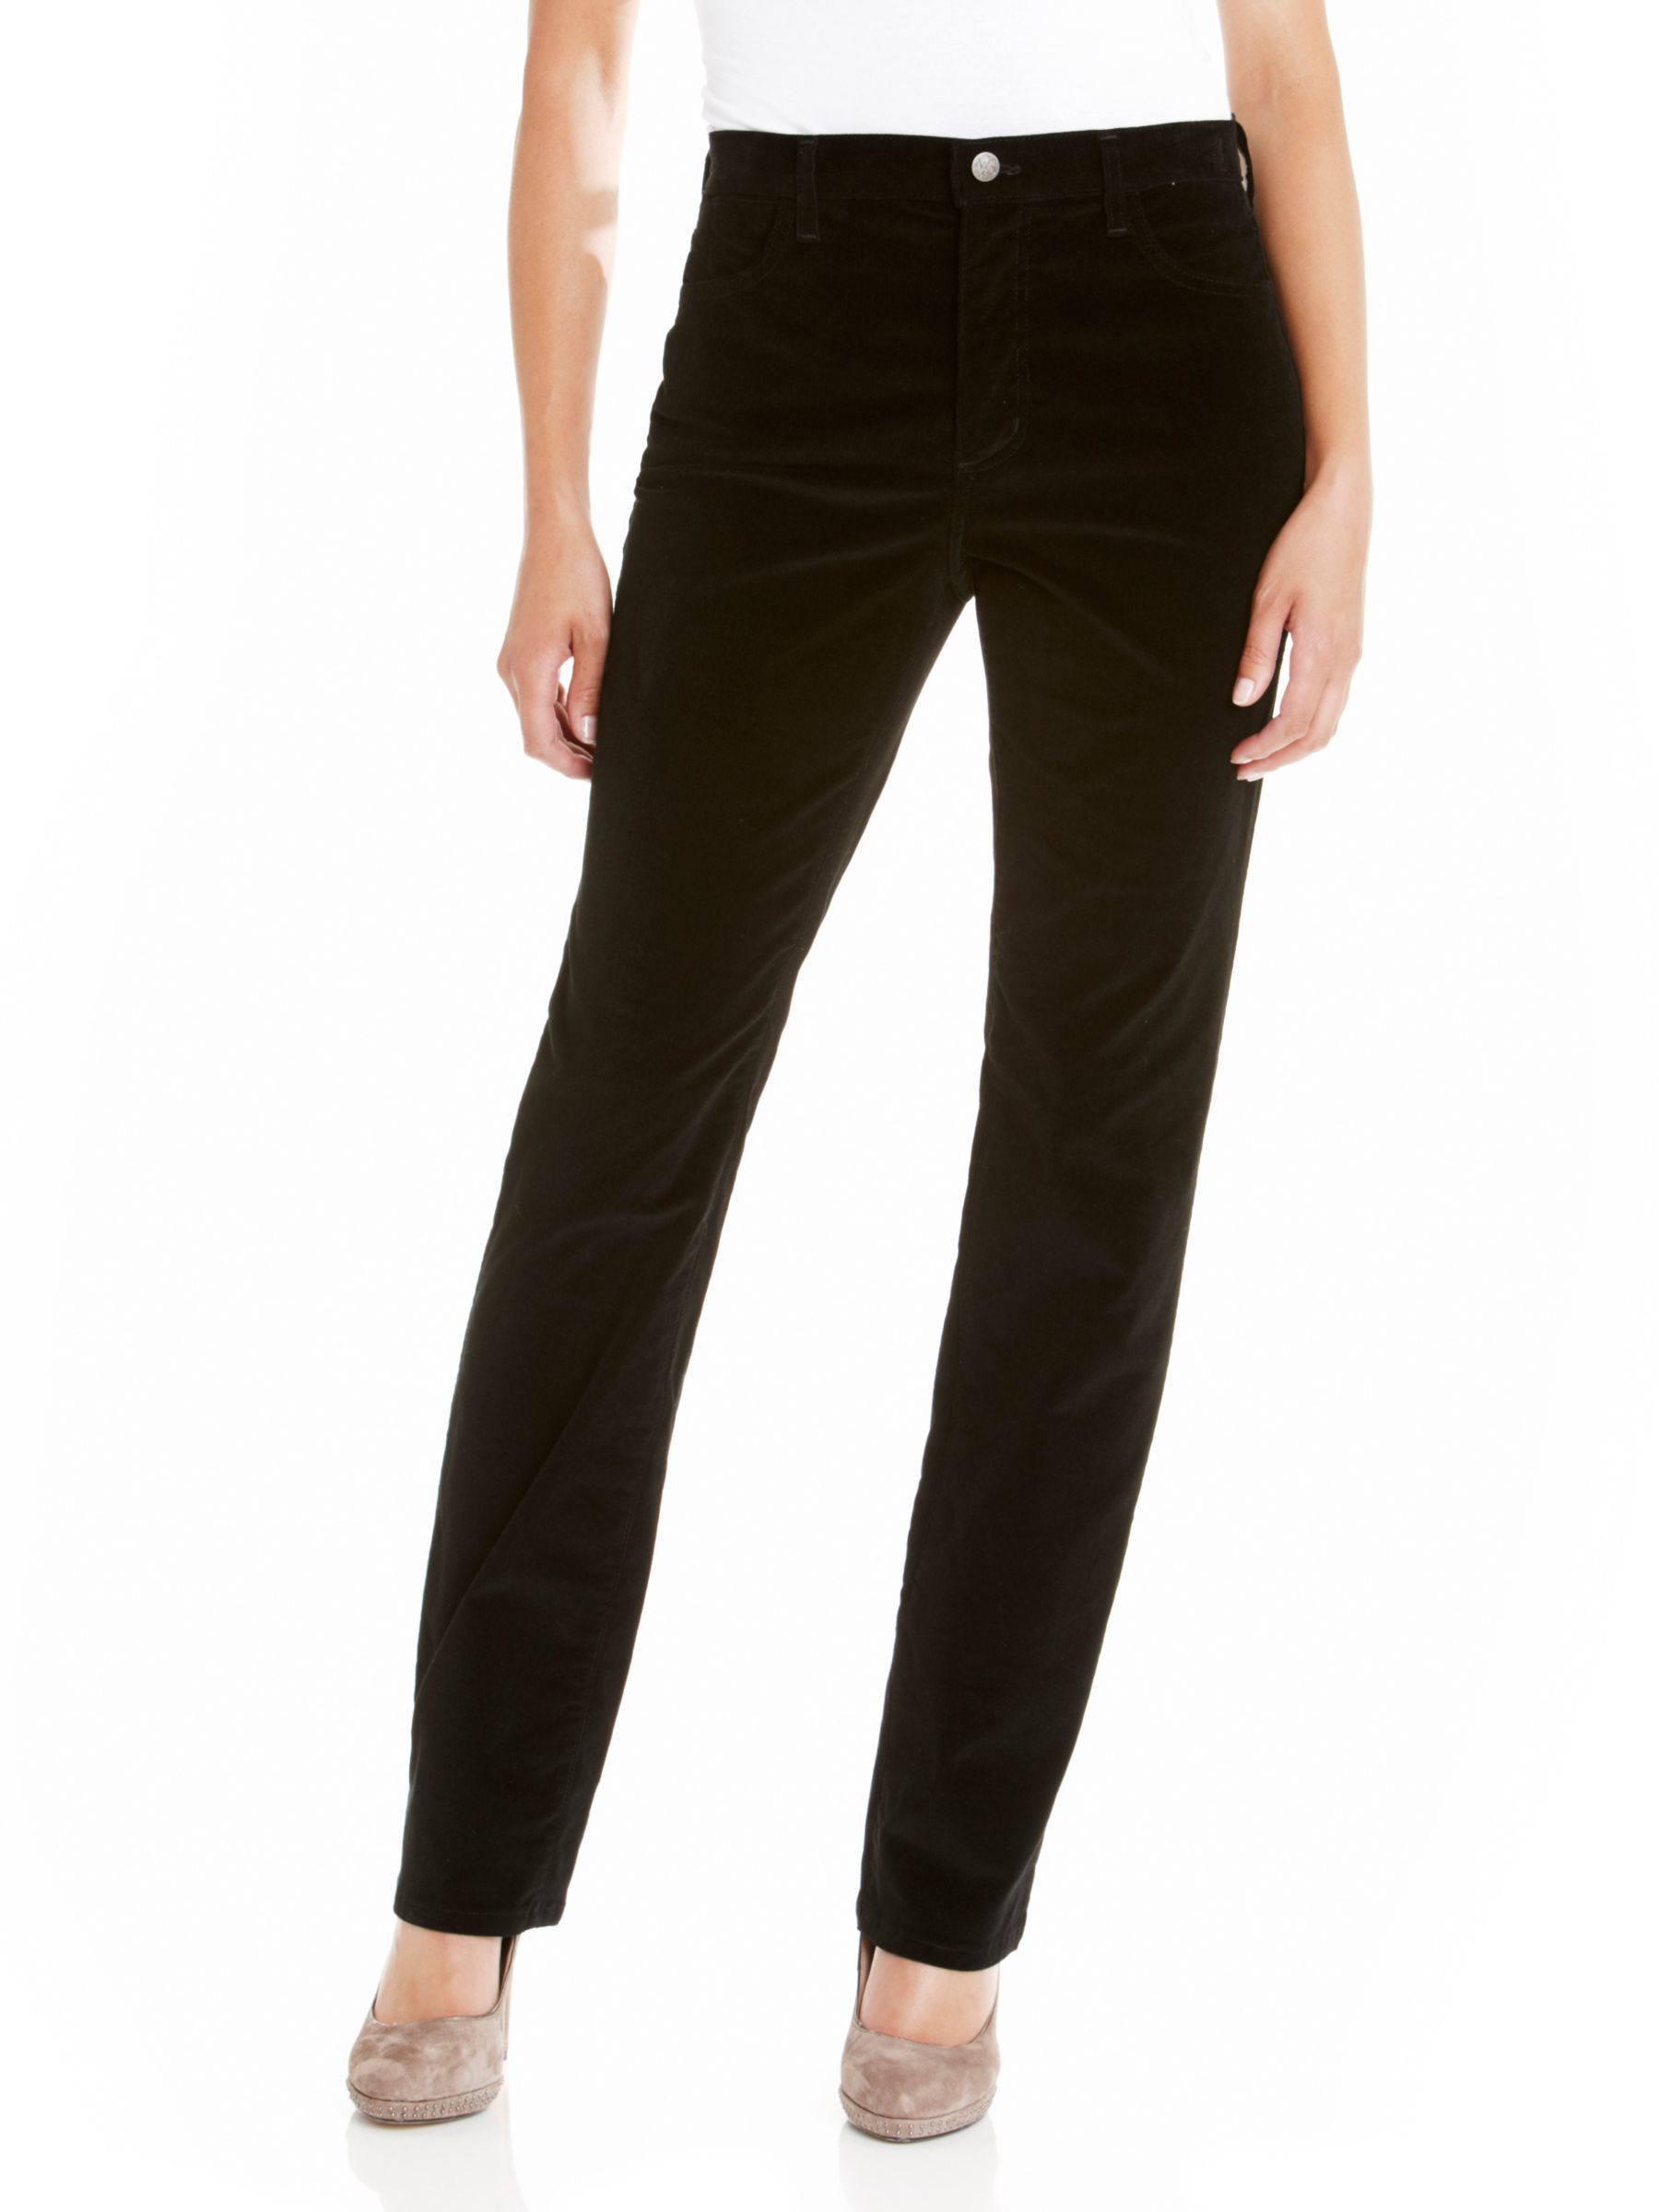 Not Your Daughter's Jeans Cord Trousers, Black at John Lewis